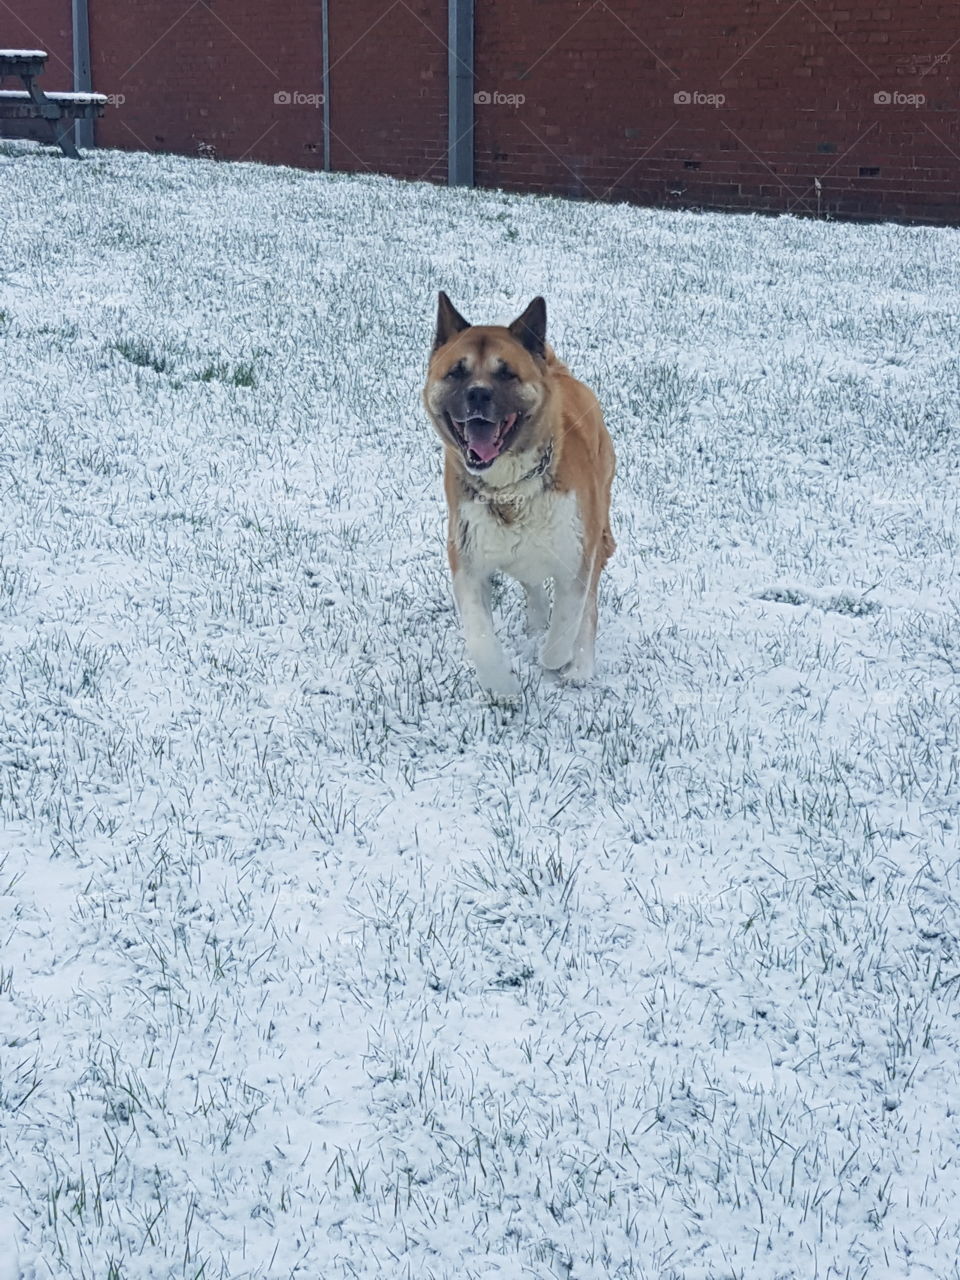 Fun With Dog In Snow